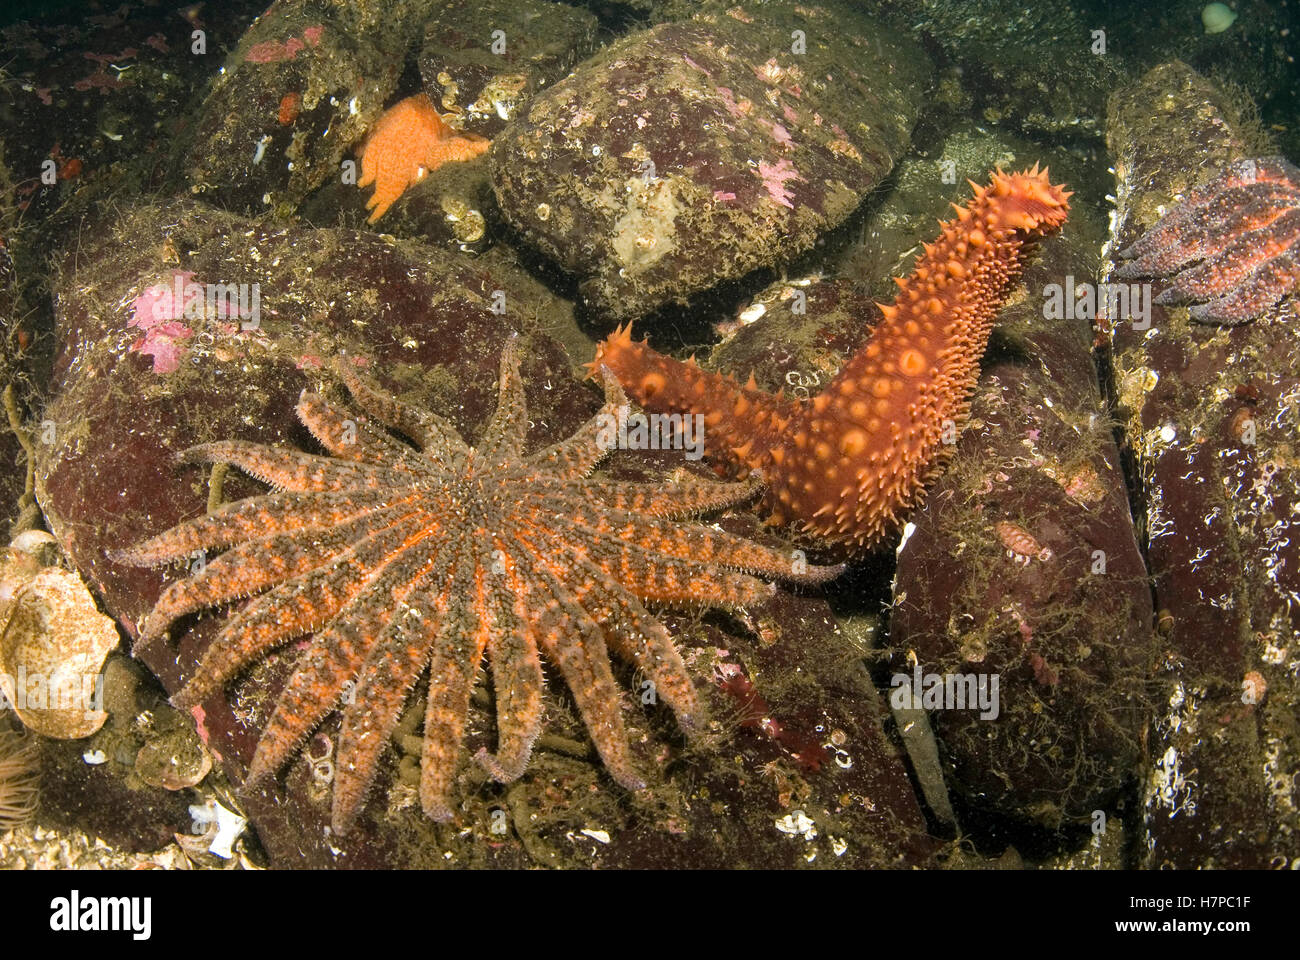 Sea Cucumber exhibits escape response when threatened by arms of Sunflower Sea Stars (Pycnopodia helianthoides), Vancouver Stock Photo